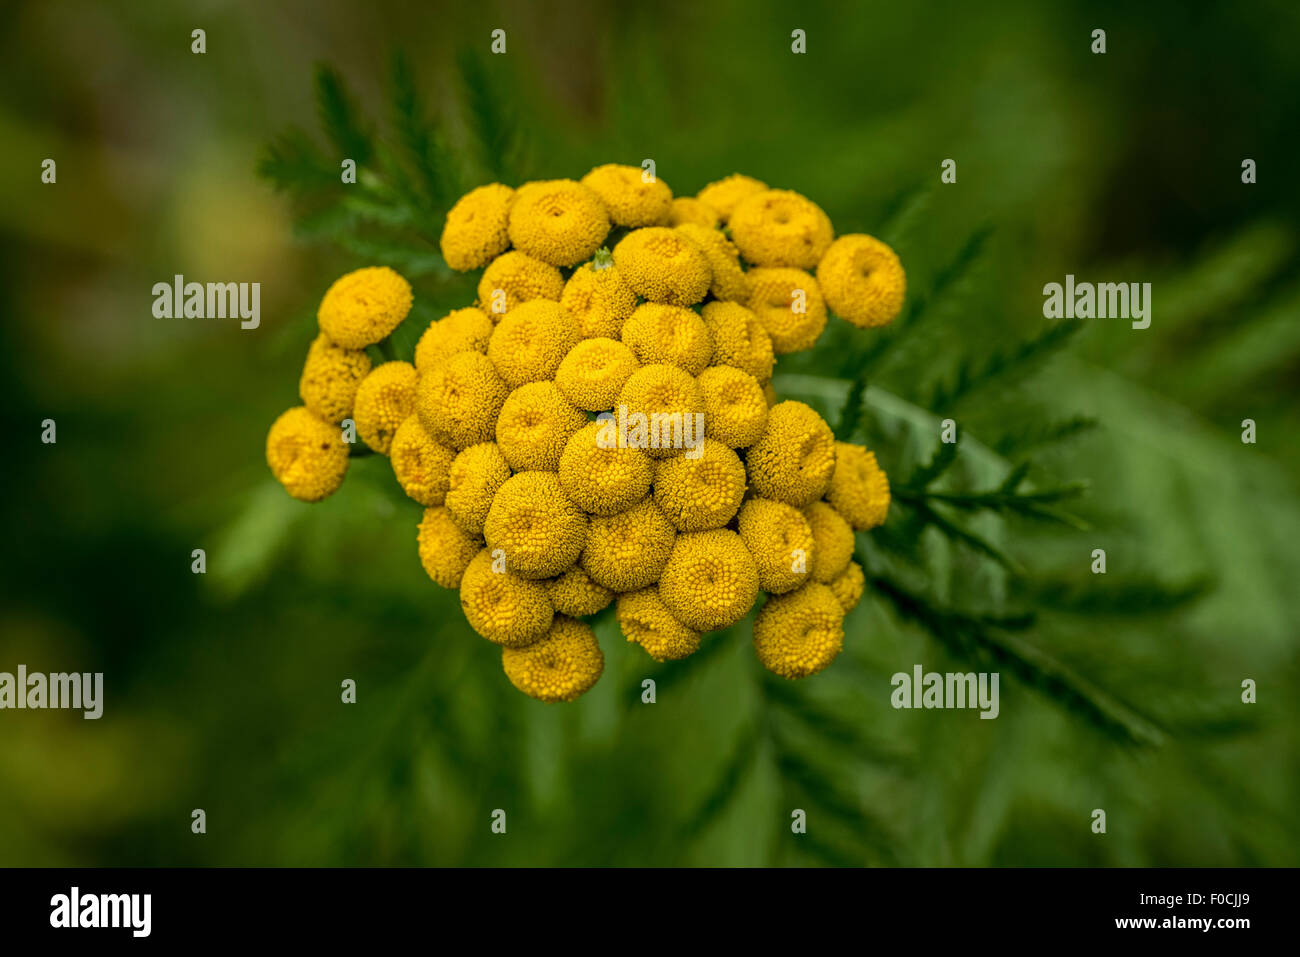 Common tansy / bitter buttons / cow bitter / golden buttons (Tanacetum vulgare / Chrysanthemum vulgare) in flower Stock Photo